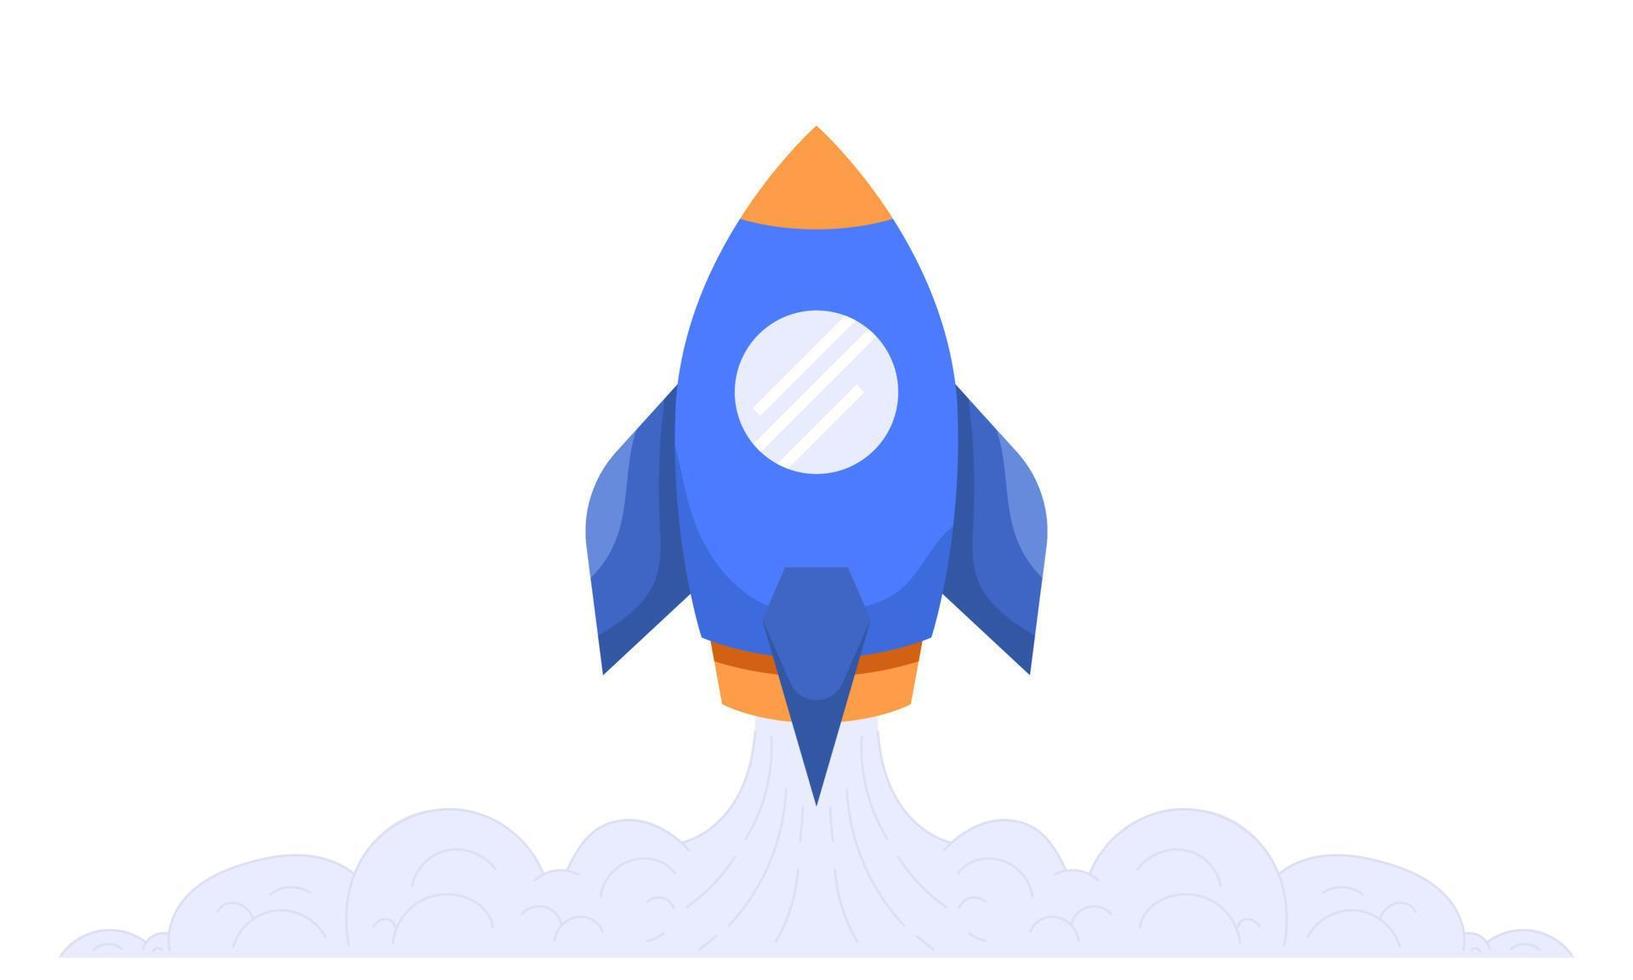 Rocket launch in the sky flying over clouds. Space ship in smoke clouds. Business concept. Start up template. Vector illustration